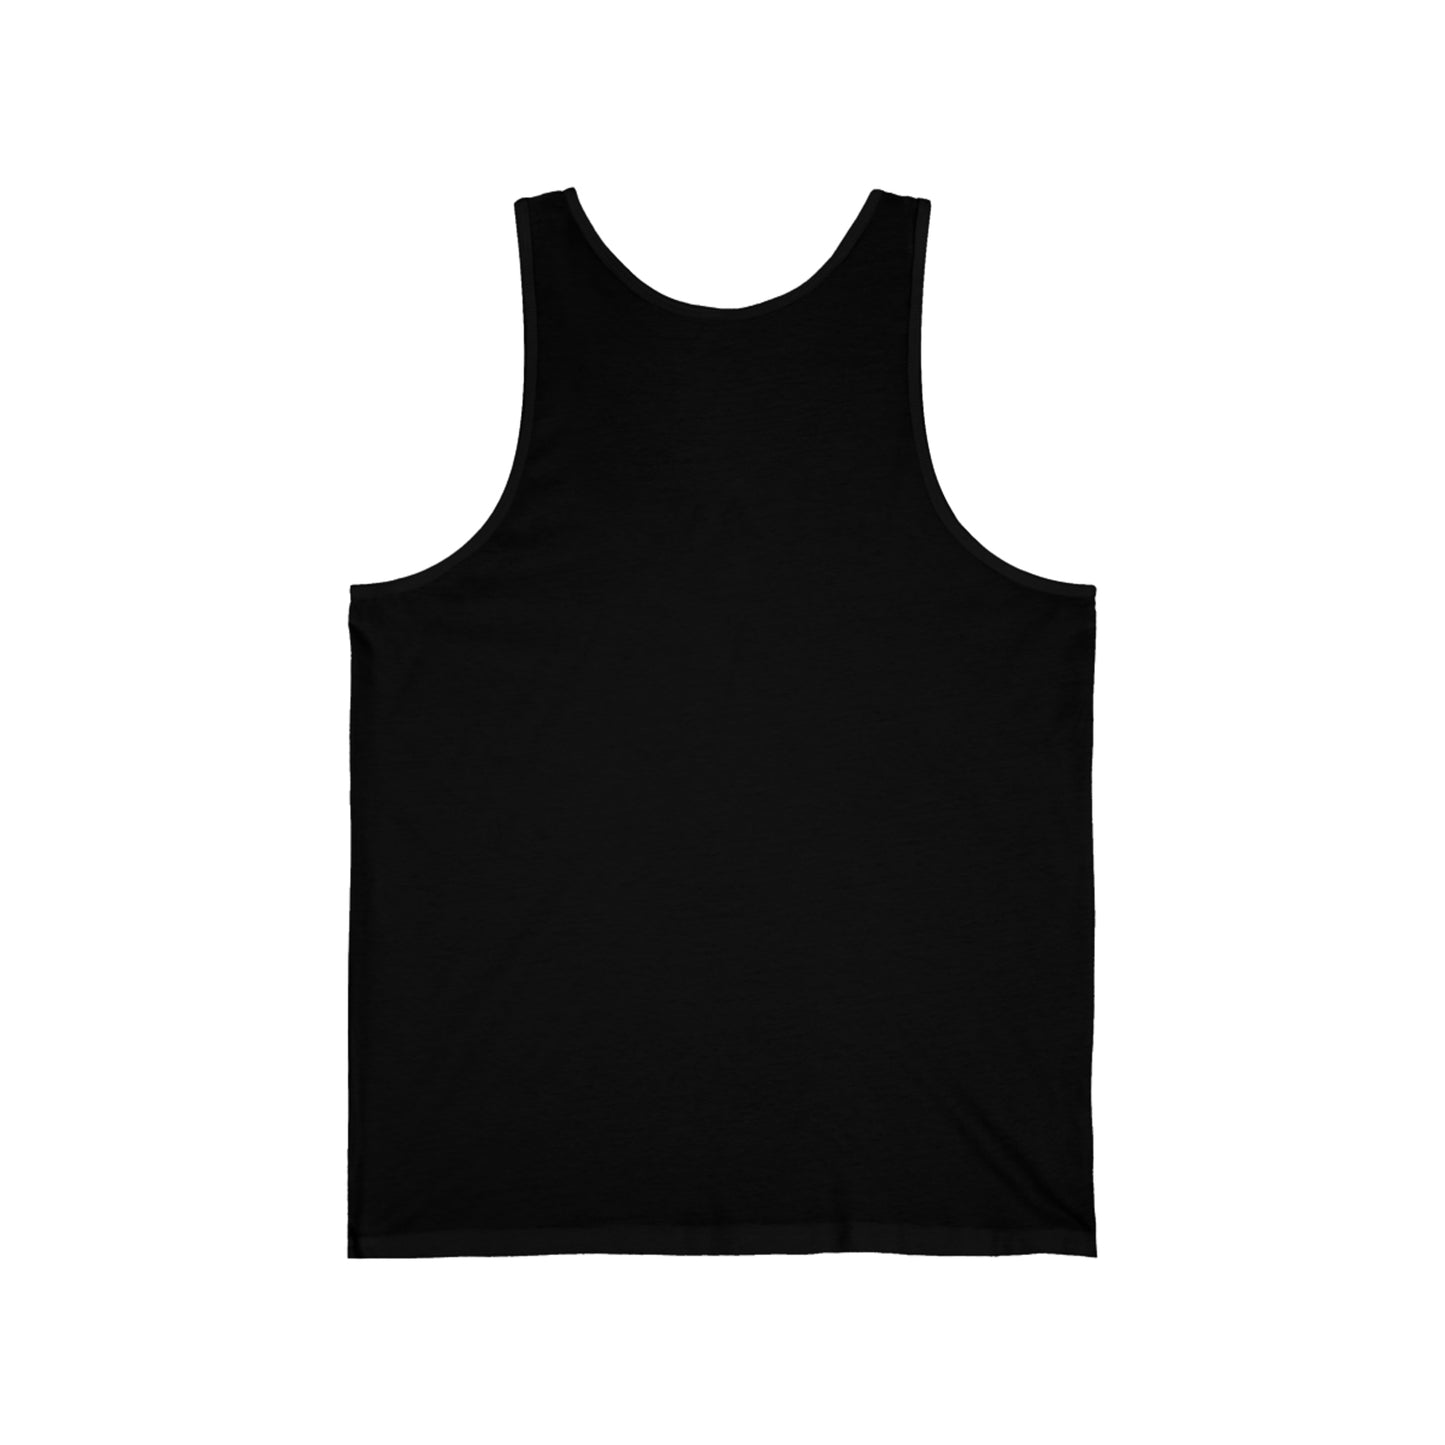 Witchy, Switchy, Kinky, and Queer Unisex Jersey Tank